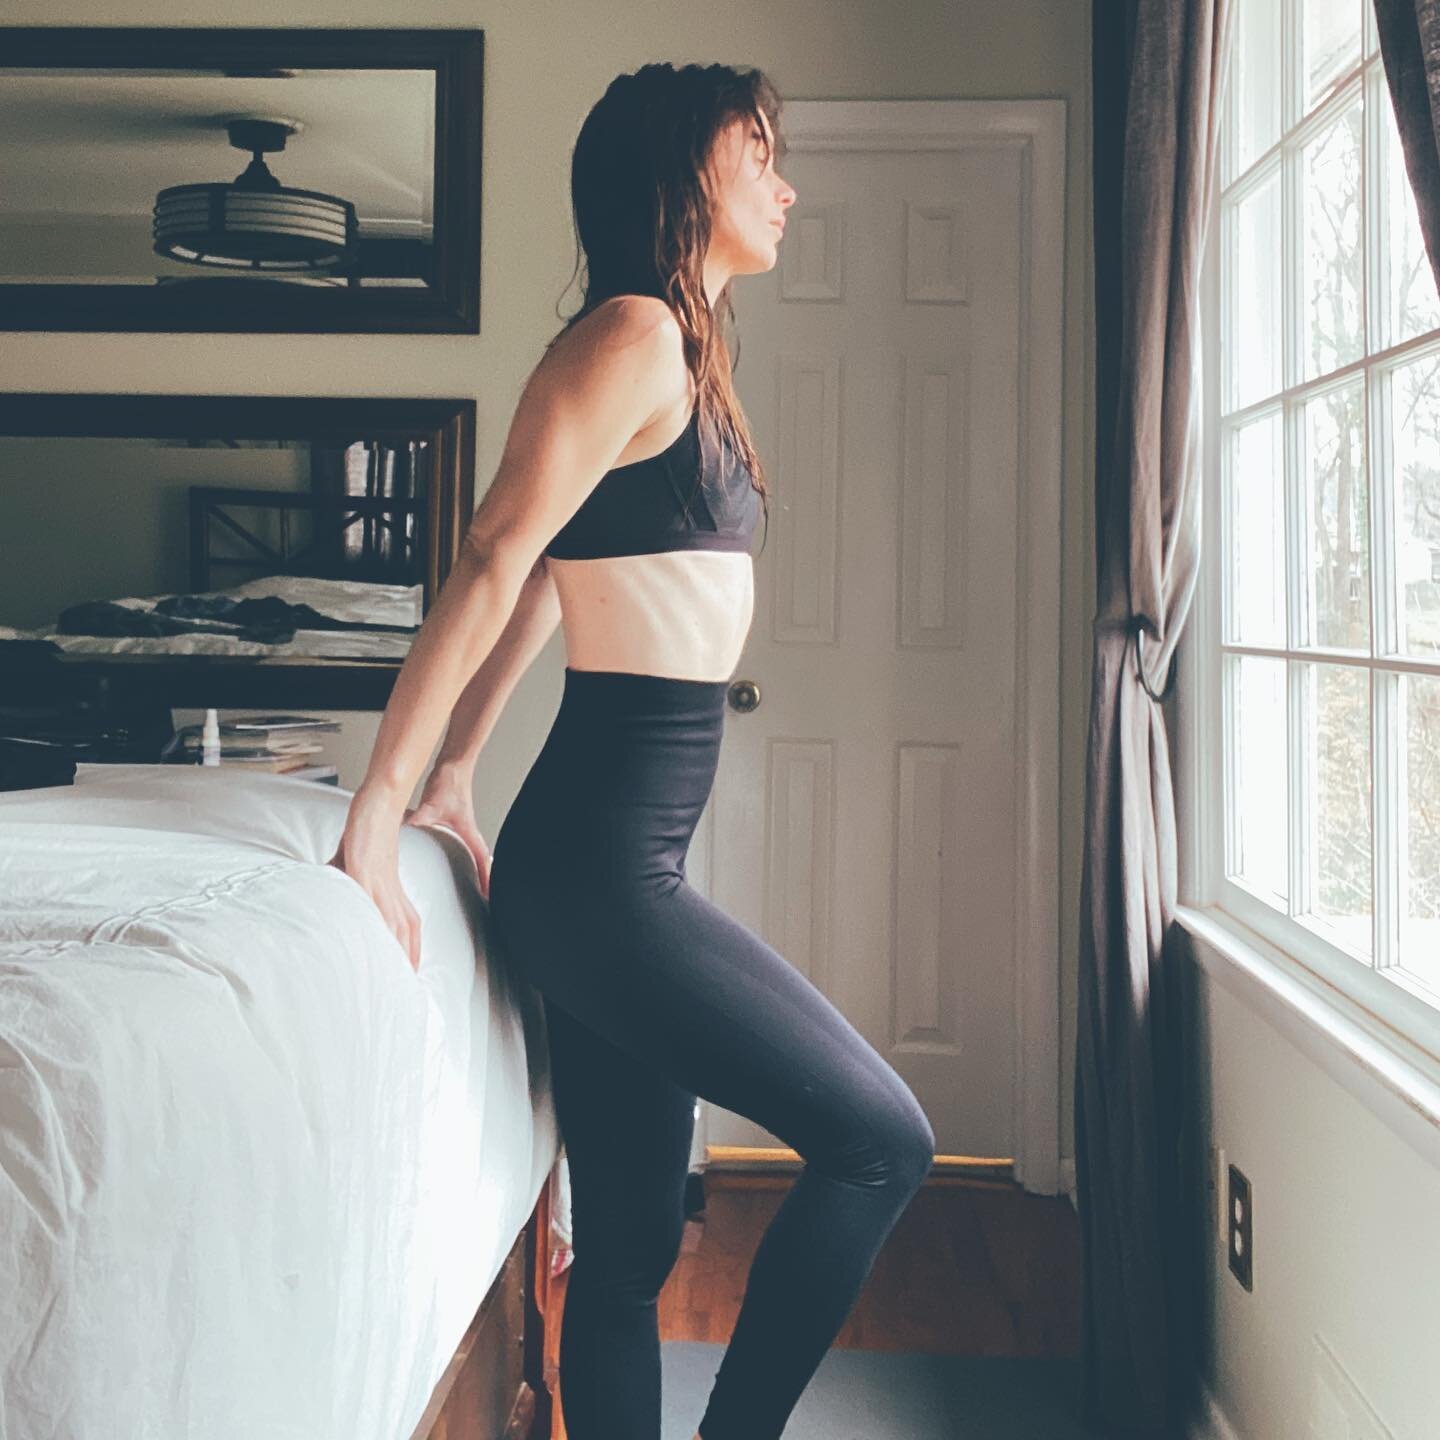 What are you up to this weekend? My weekend plans include long hot showers, CBD smoothies, and chilling in these beautiful and sustainably crafted leggings by @boobdesign. Made in Italy, they design comfortable high quality clothes for moms and moms-